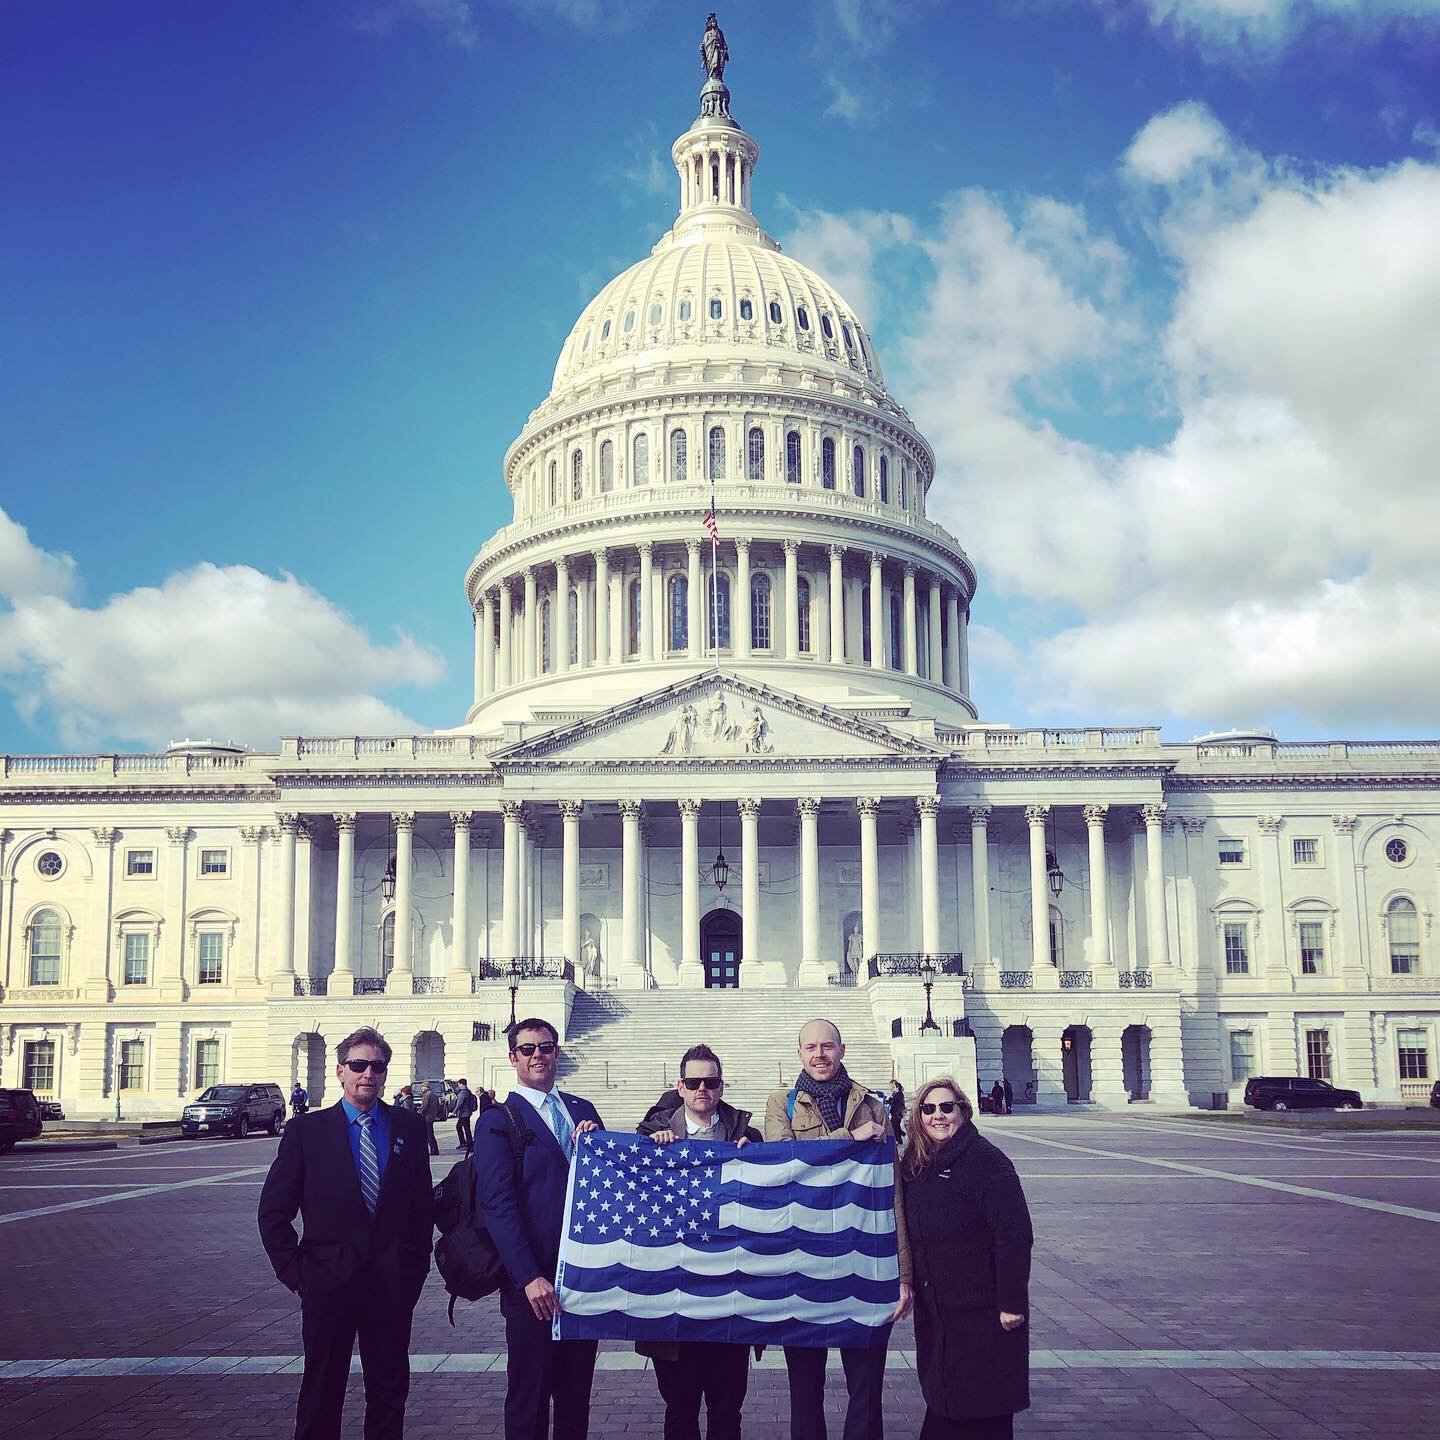 Our Washington delegation holds the United Oceans flag in front of the capitol building in DC